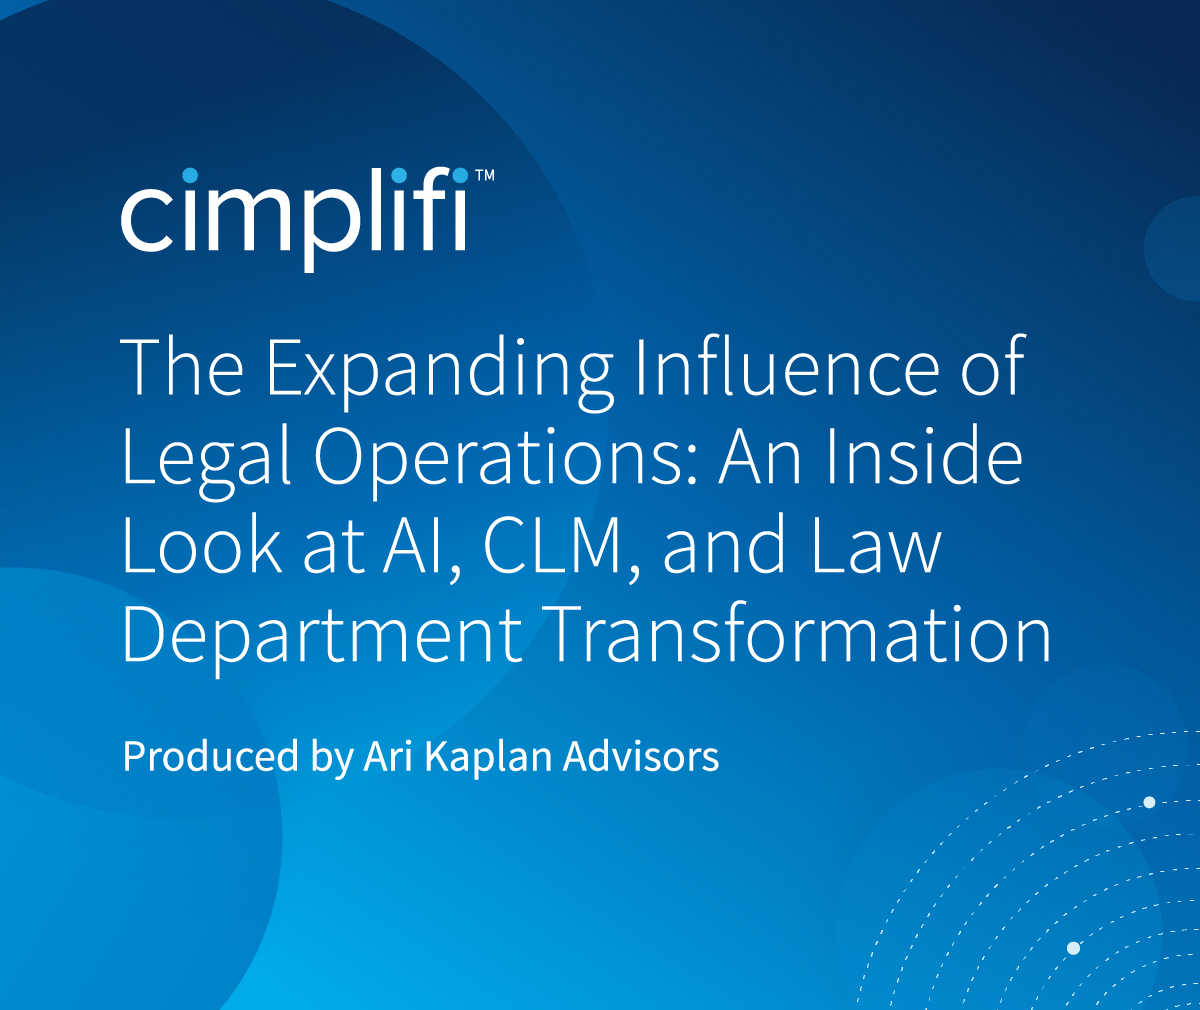 Cimplifi™ Announces New Legal Operations Report and Sponsorship Details at CLOC Global Institute